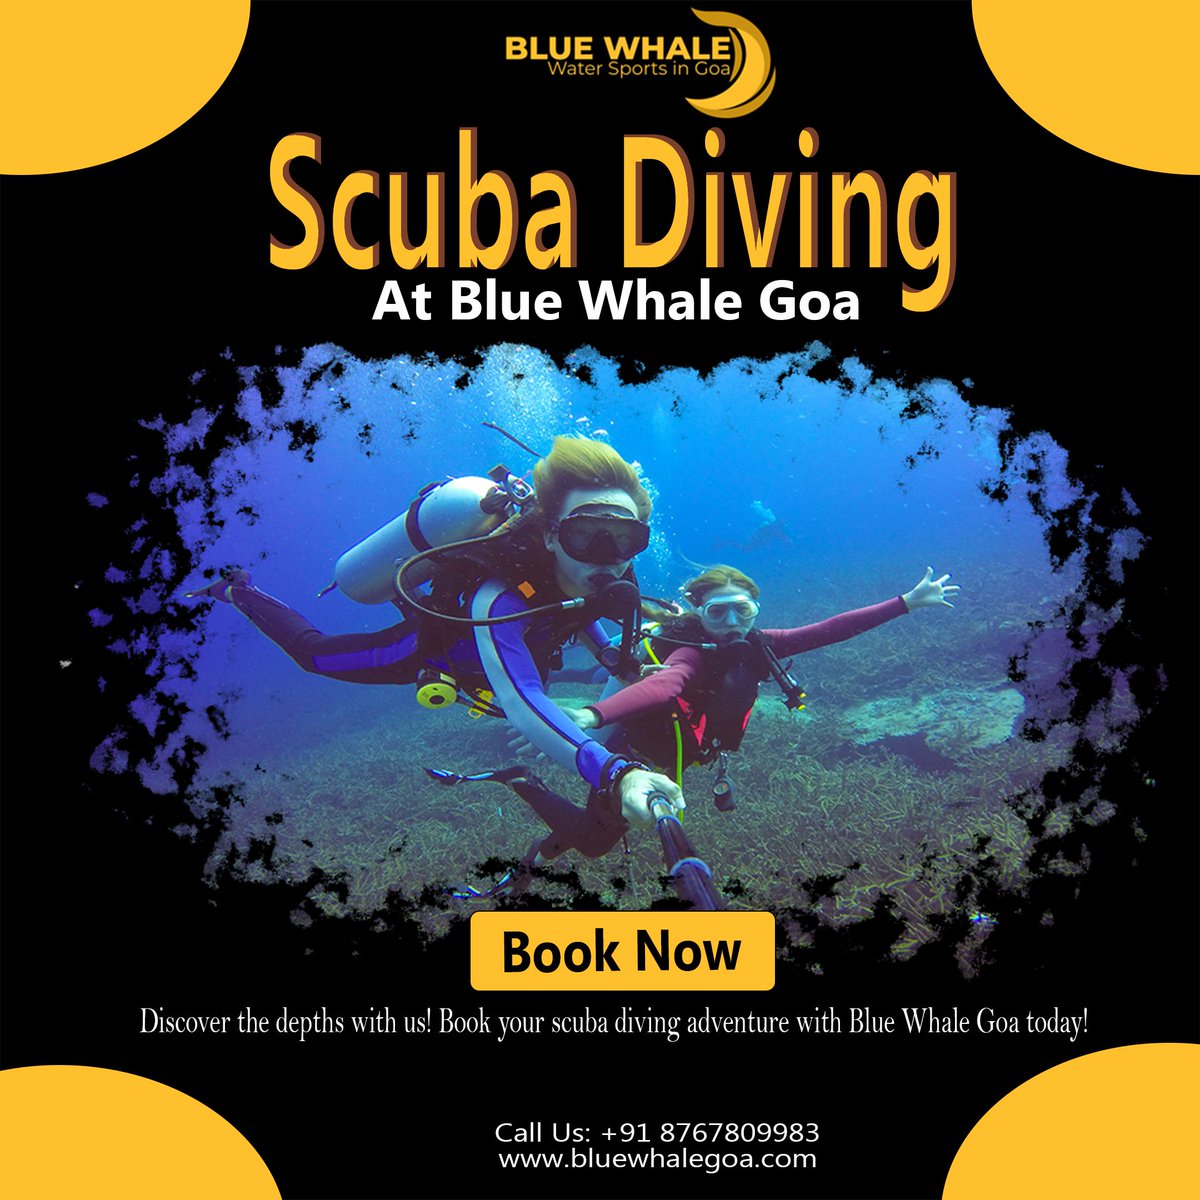 Ready to explore the depths? 🐟 Dive into adventure with Blue Whale Goa! Book your scuba diving experience today and discover a whole new world beneath the waves. For bookings, contact us at:
📞 Mob: +91 8767809983
🌐 Web: buff.ly/3JHWGpI #ScubaDiving #AdventureAwaits